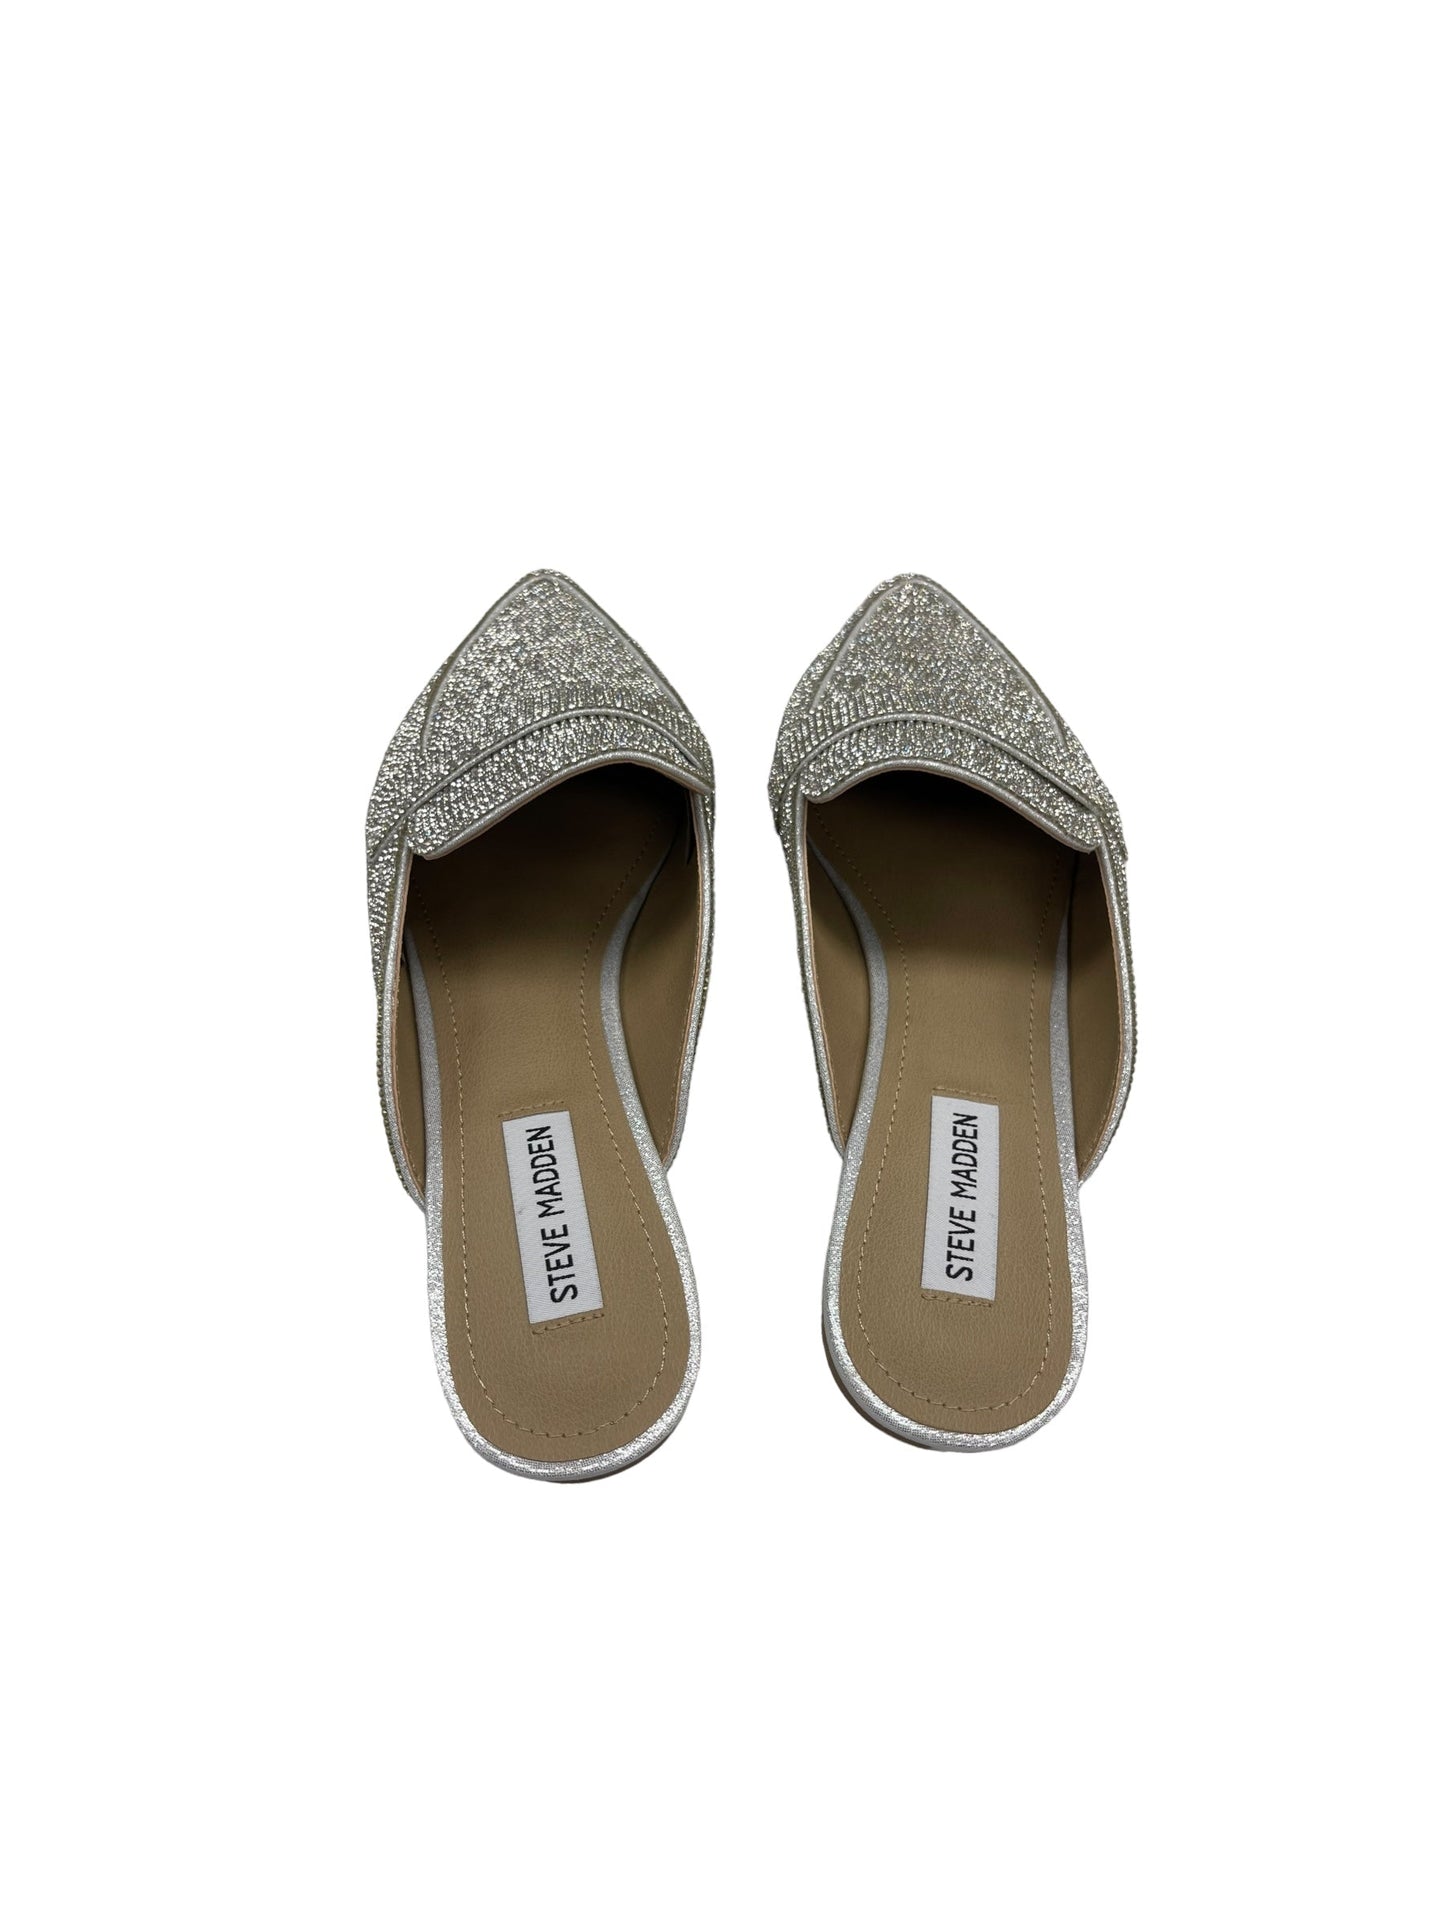 Silver Shoes Flats Steve Madden, Size 11